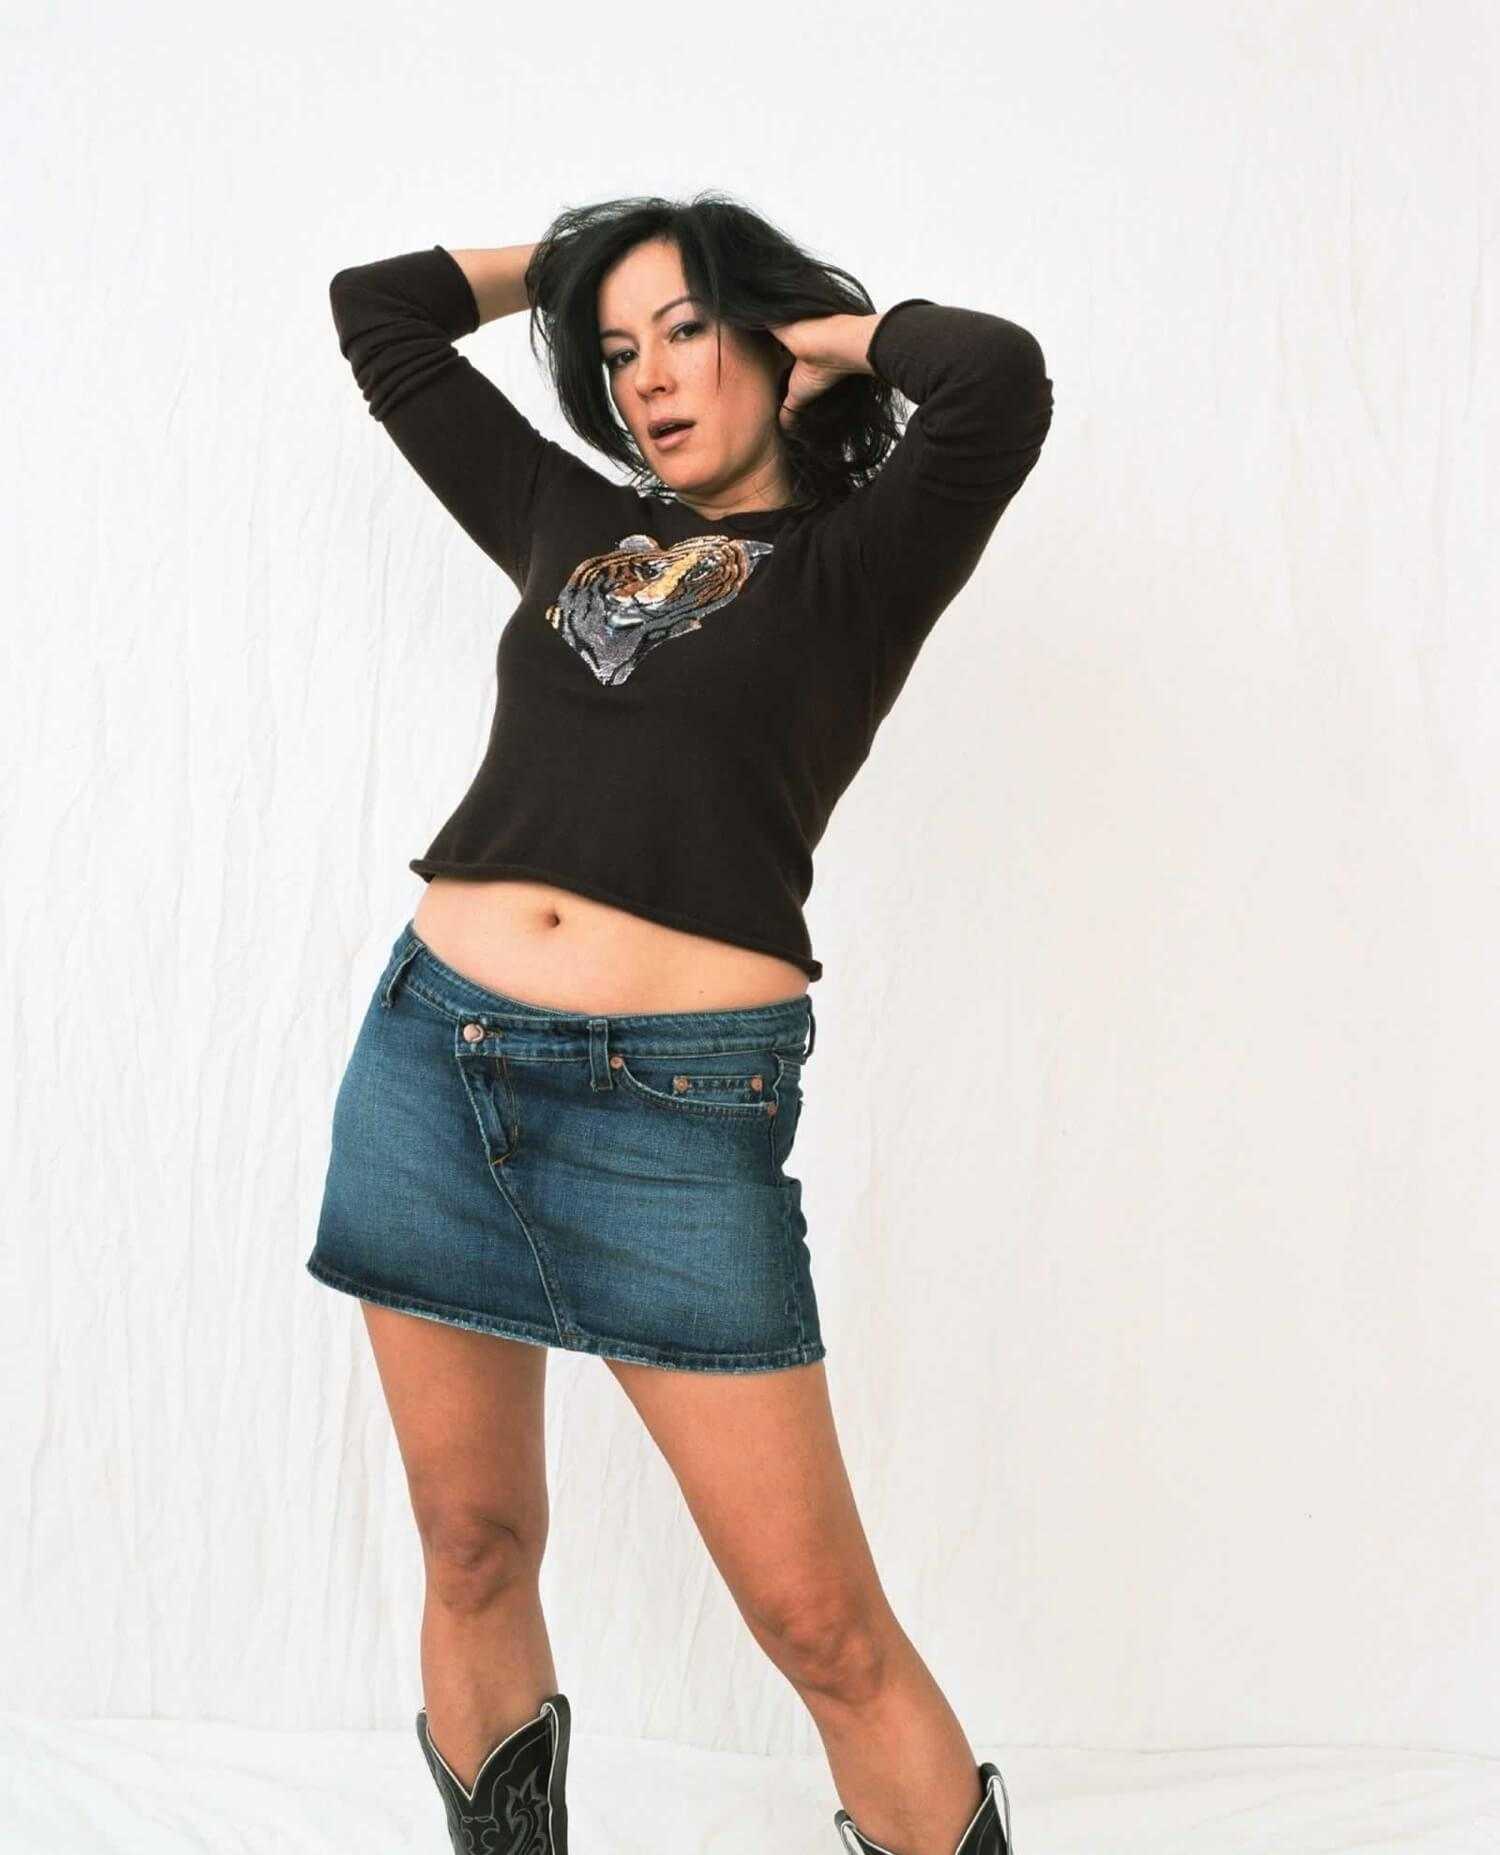 Jennifer Tilly Nude Pictures Are An Exemplification Of Hotness The